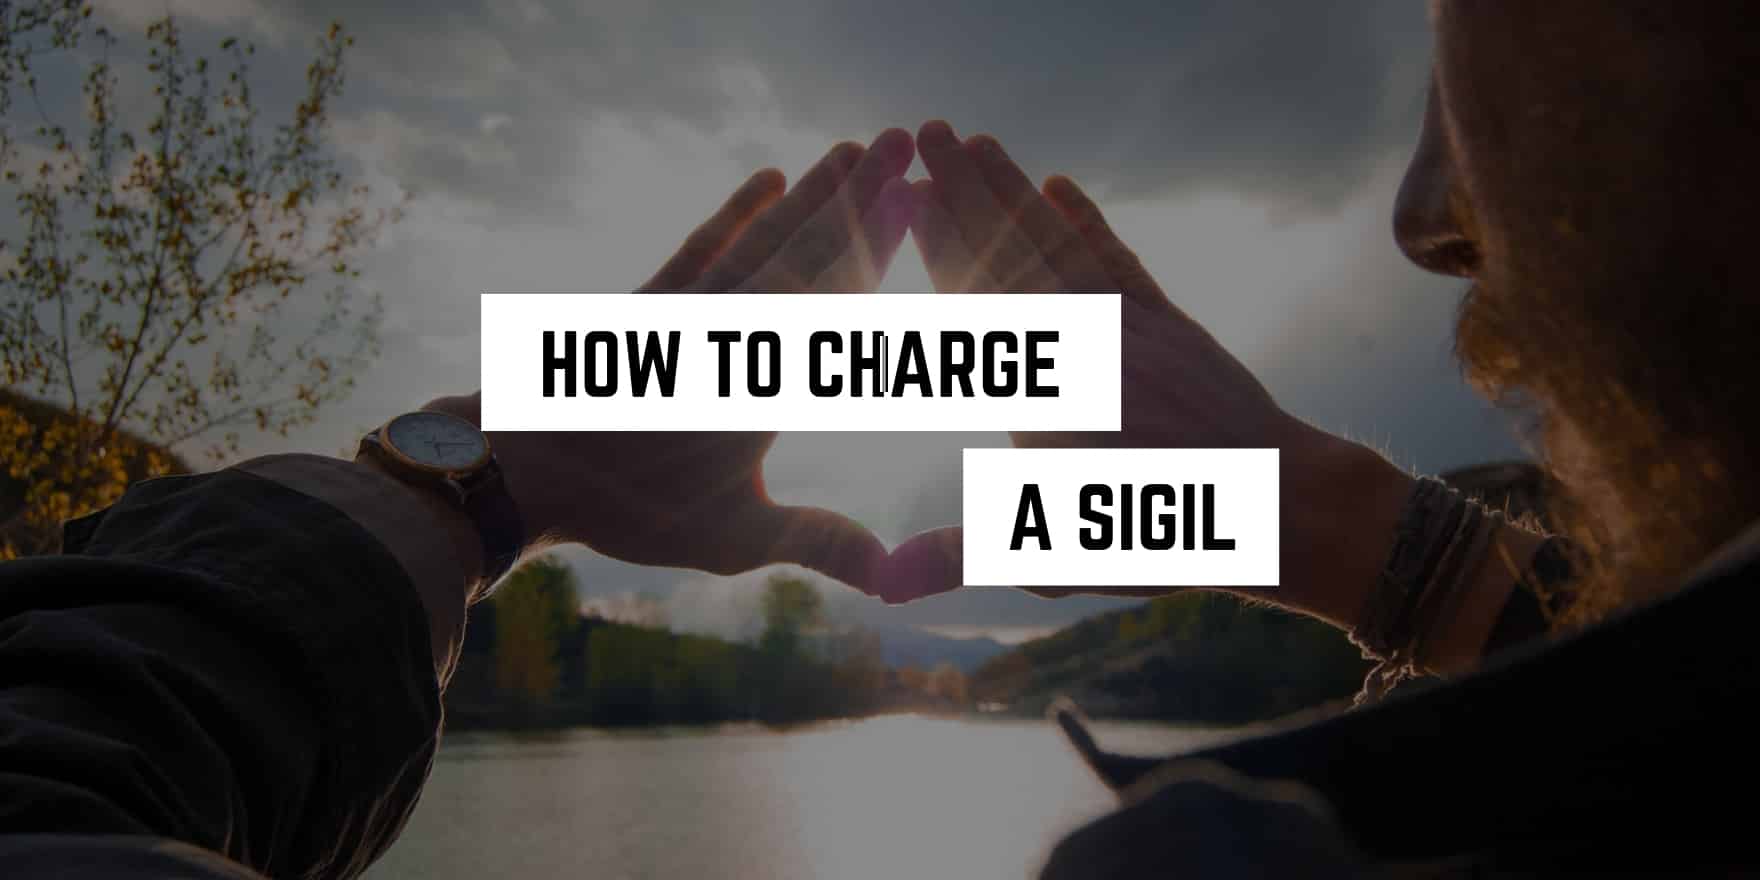 How Do You Charge a Sigil?